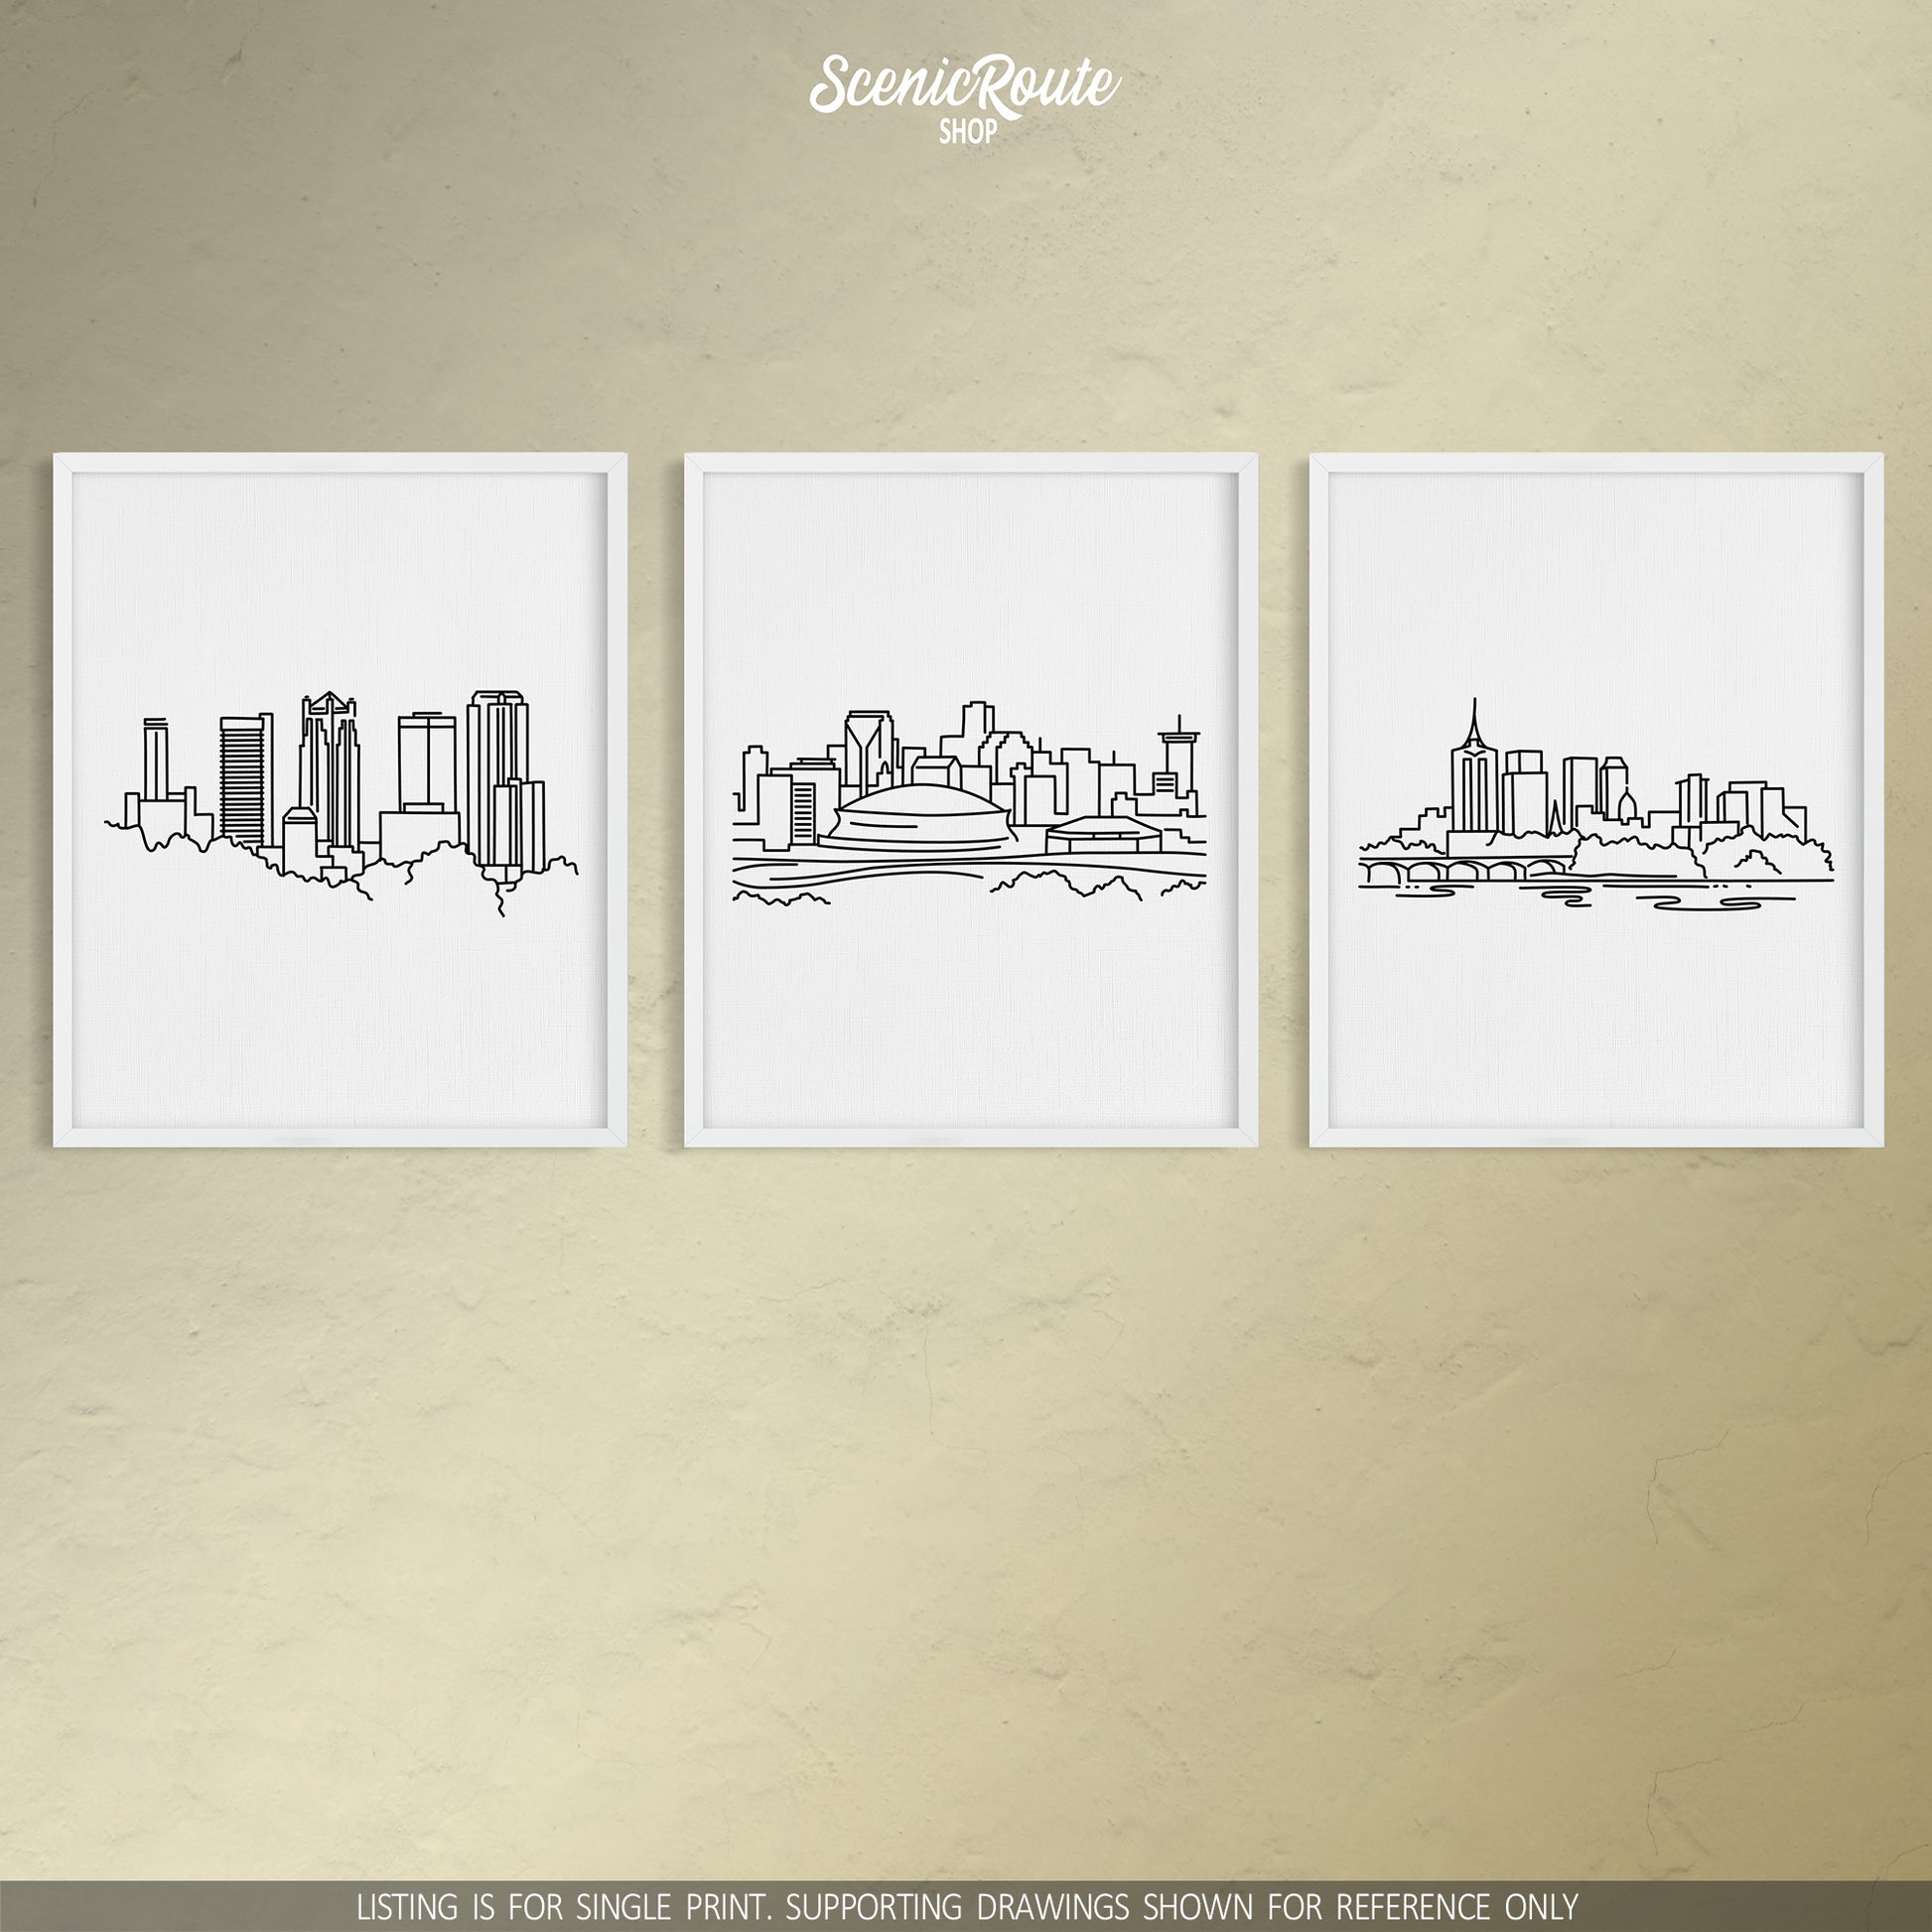 A group of three framed drawings on a tan wall. The line art drawings include the Birmingham Skyline, New Orleans Skyline, and Tulsa Skyline